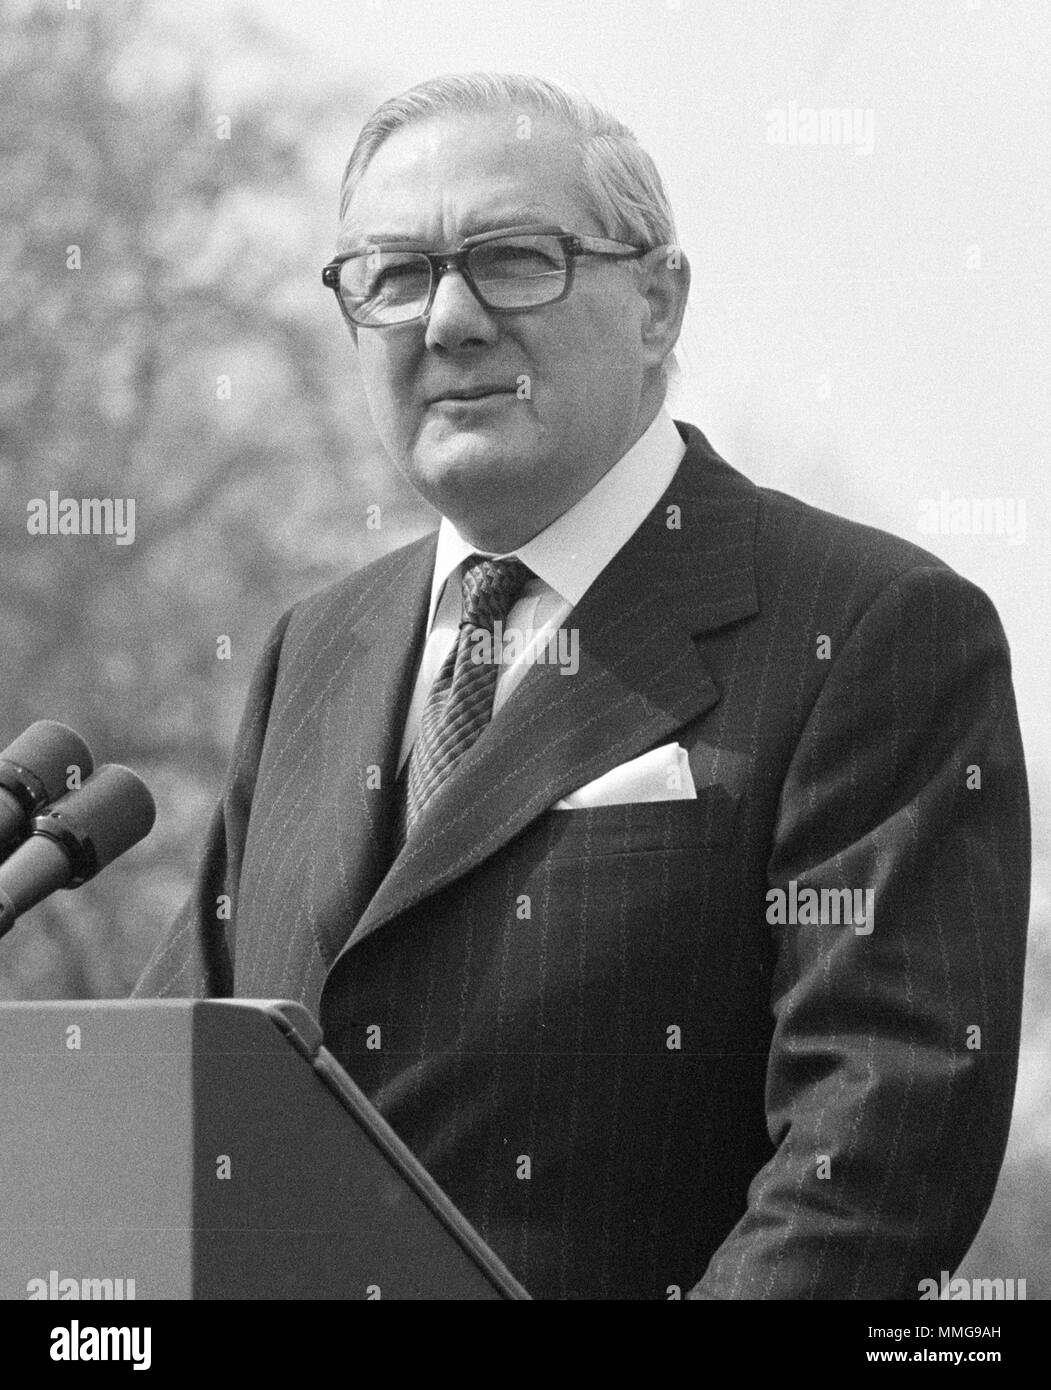 Prime Minister James Callaghan, Prime Minister of the United Kingdom, Leonard James Callaghan,  (1912 – 2005), Jim Callaghan, Prime Minister of the United Kingdom from 1976 to 1979 Stock Photo